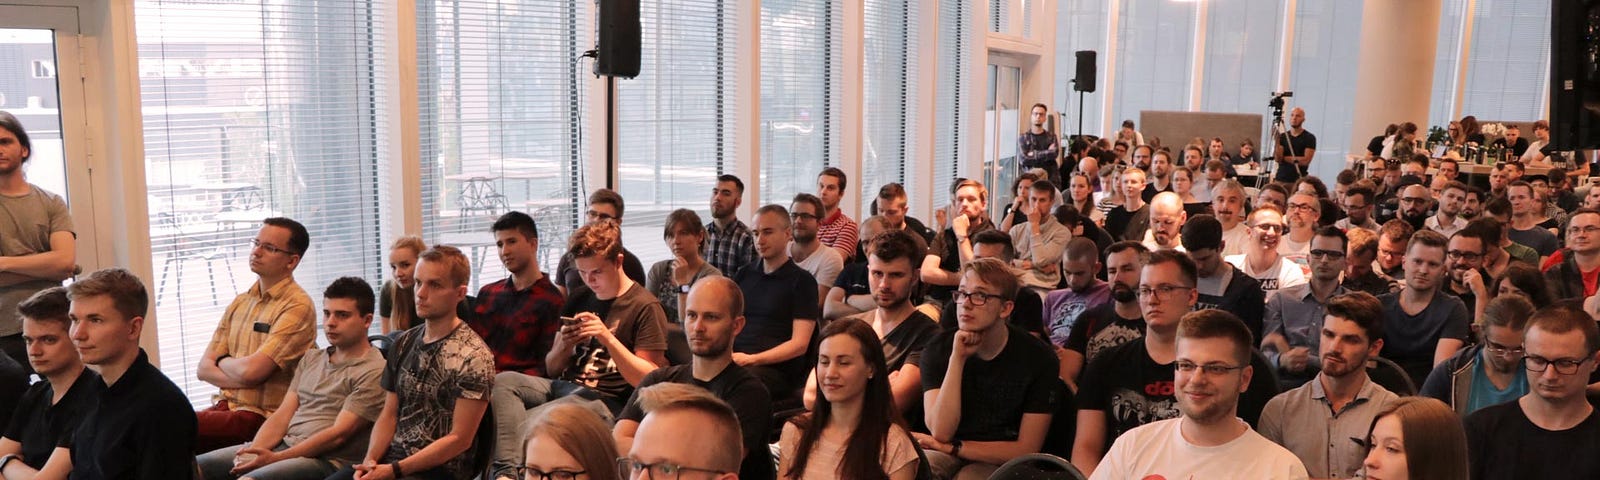 Photo from WarsawJS Meetup presents a crowded space at Warsaw Spire